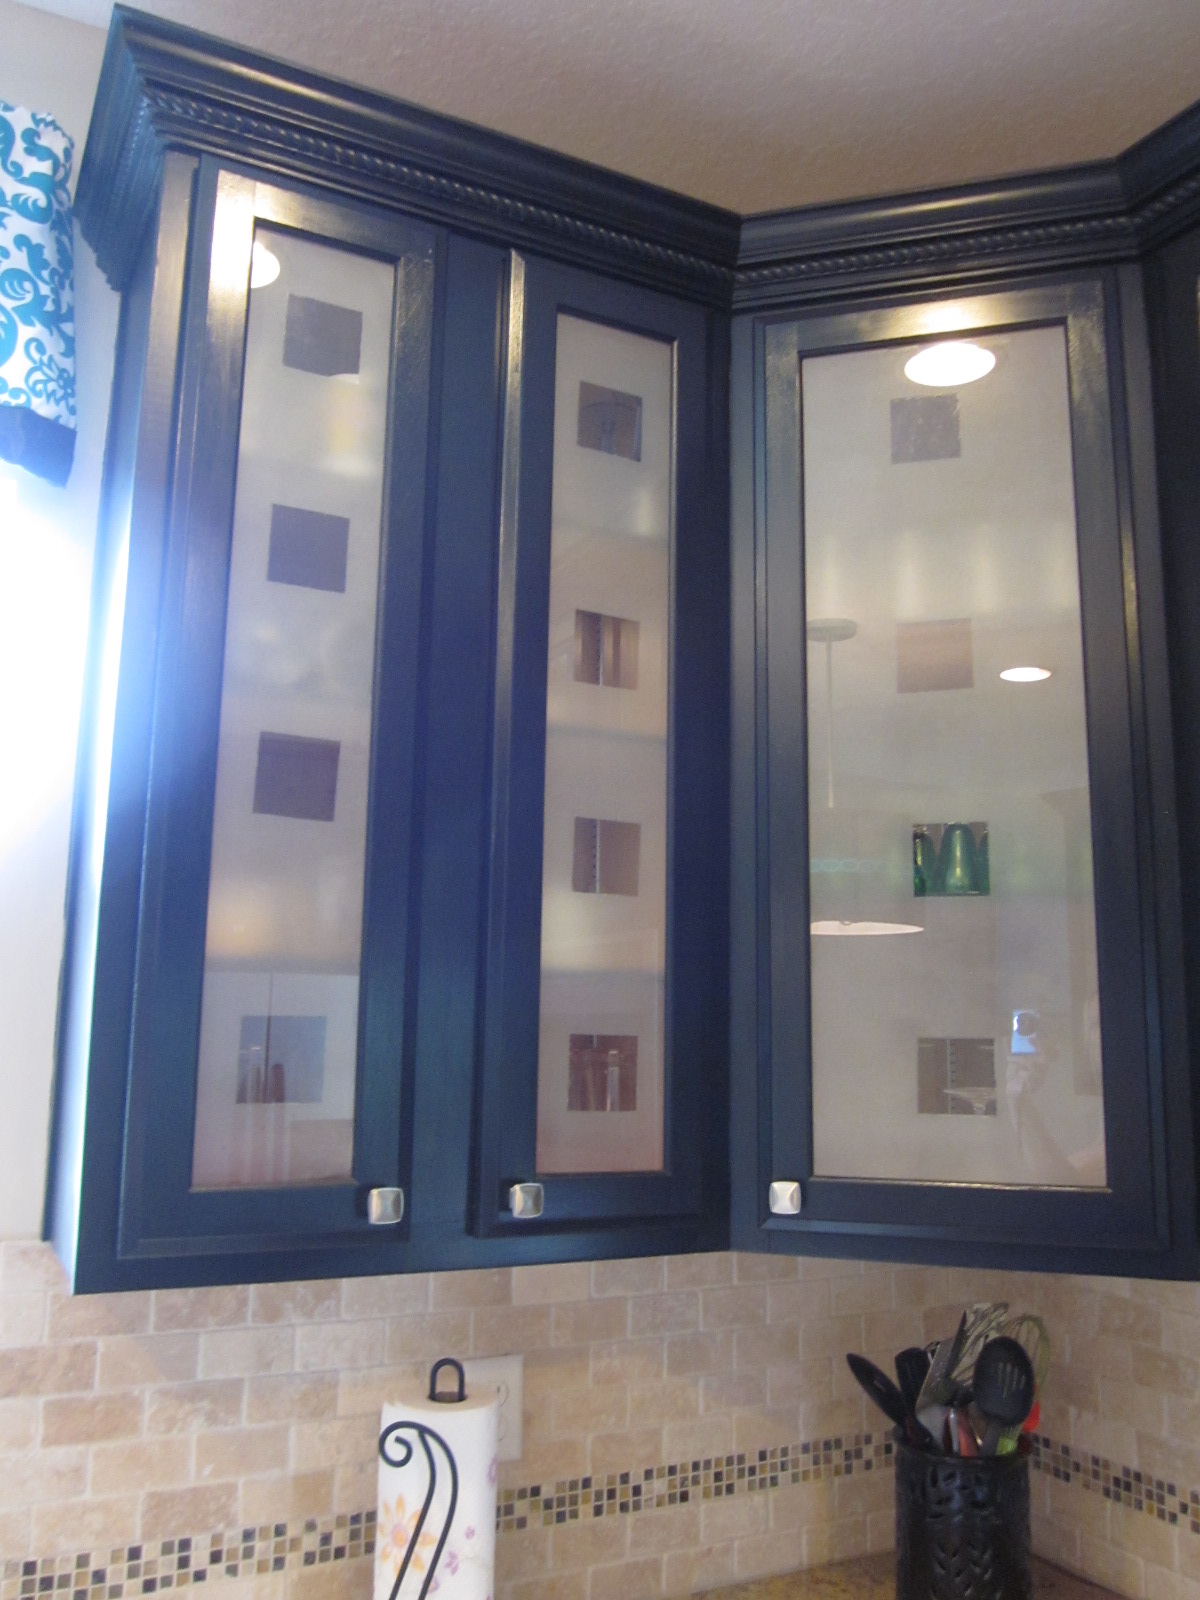 Does Frosted Glass by Rust-oleum work? 